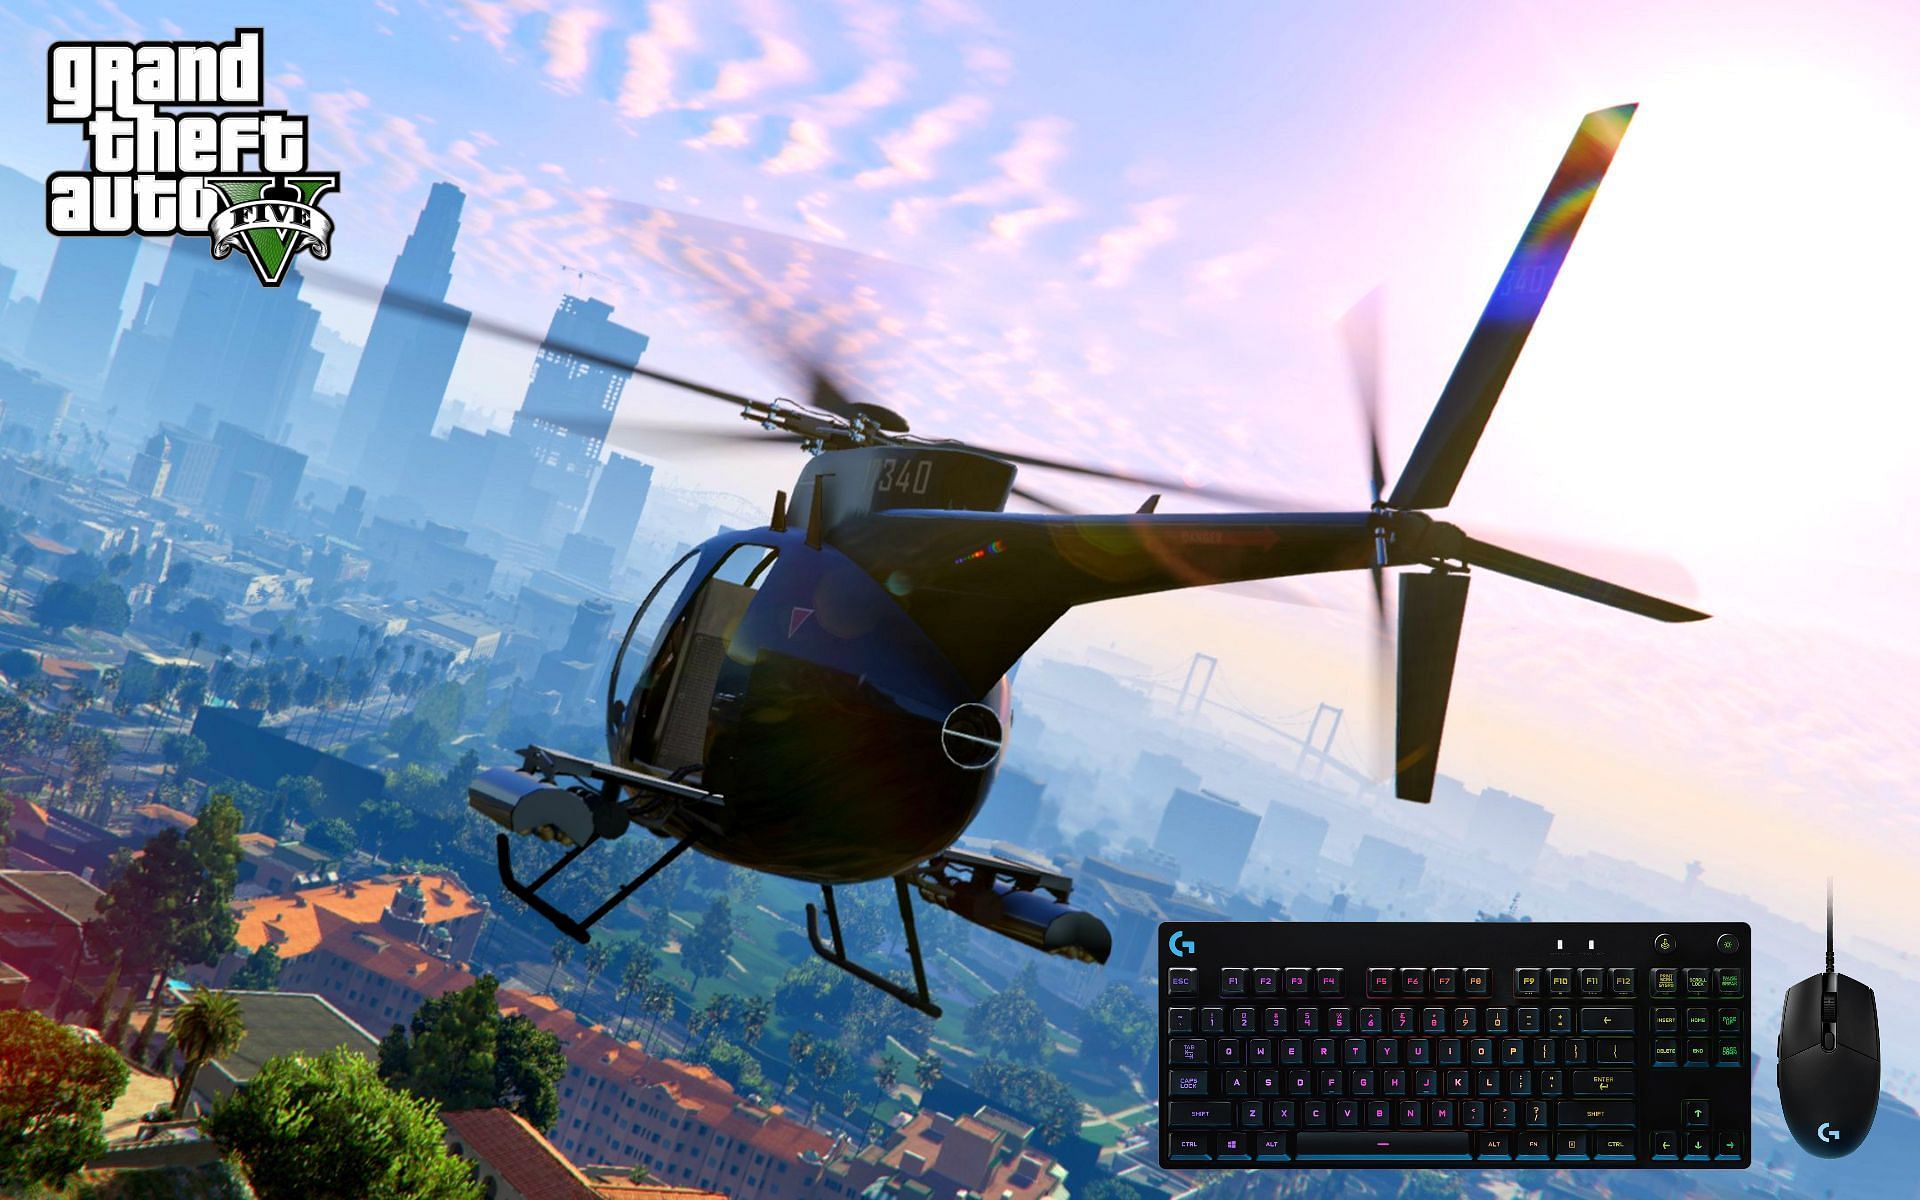 How to fly a helicopter in GTA 5 using a keyboard (Image via Rockstar Games and Logitech)